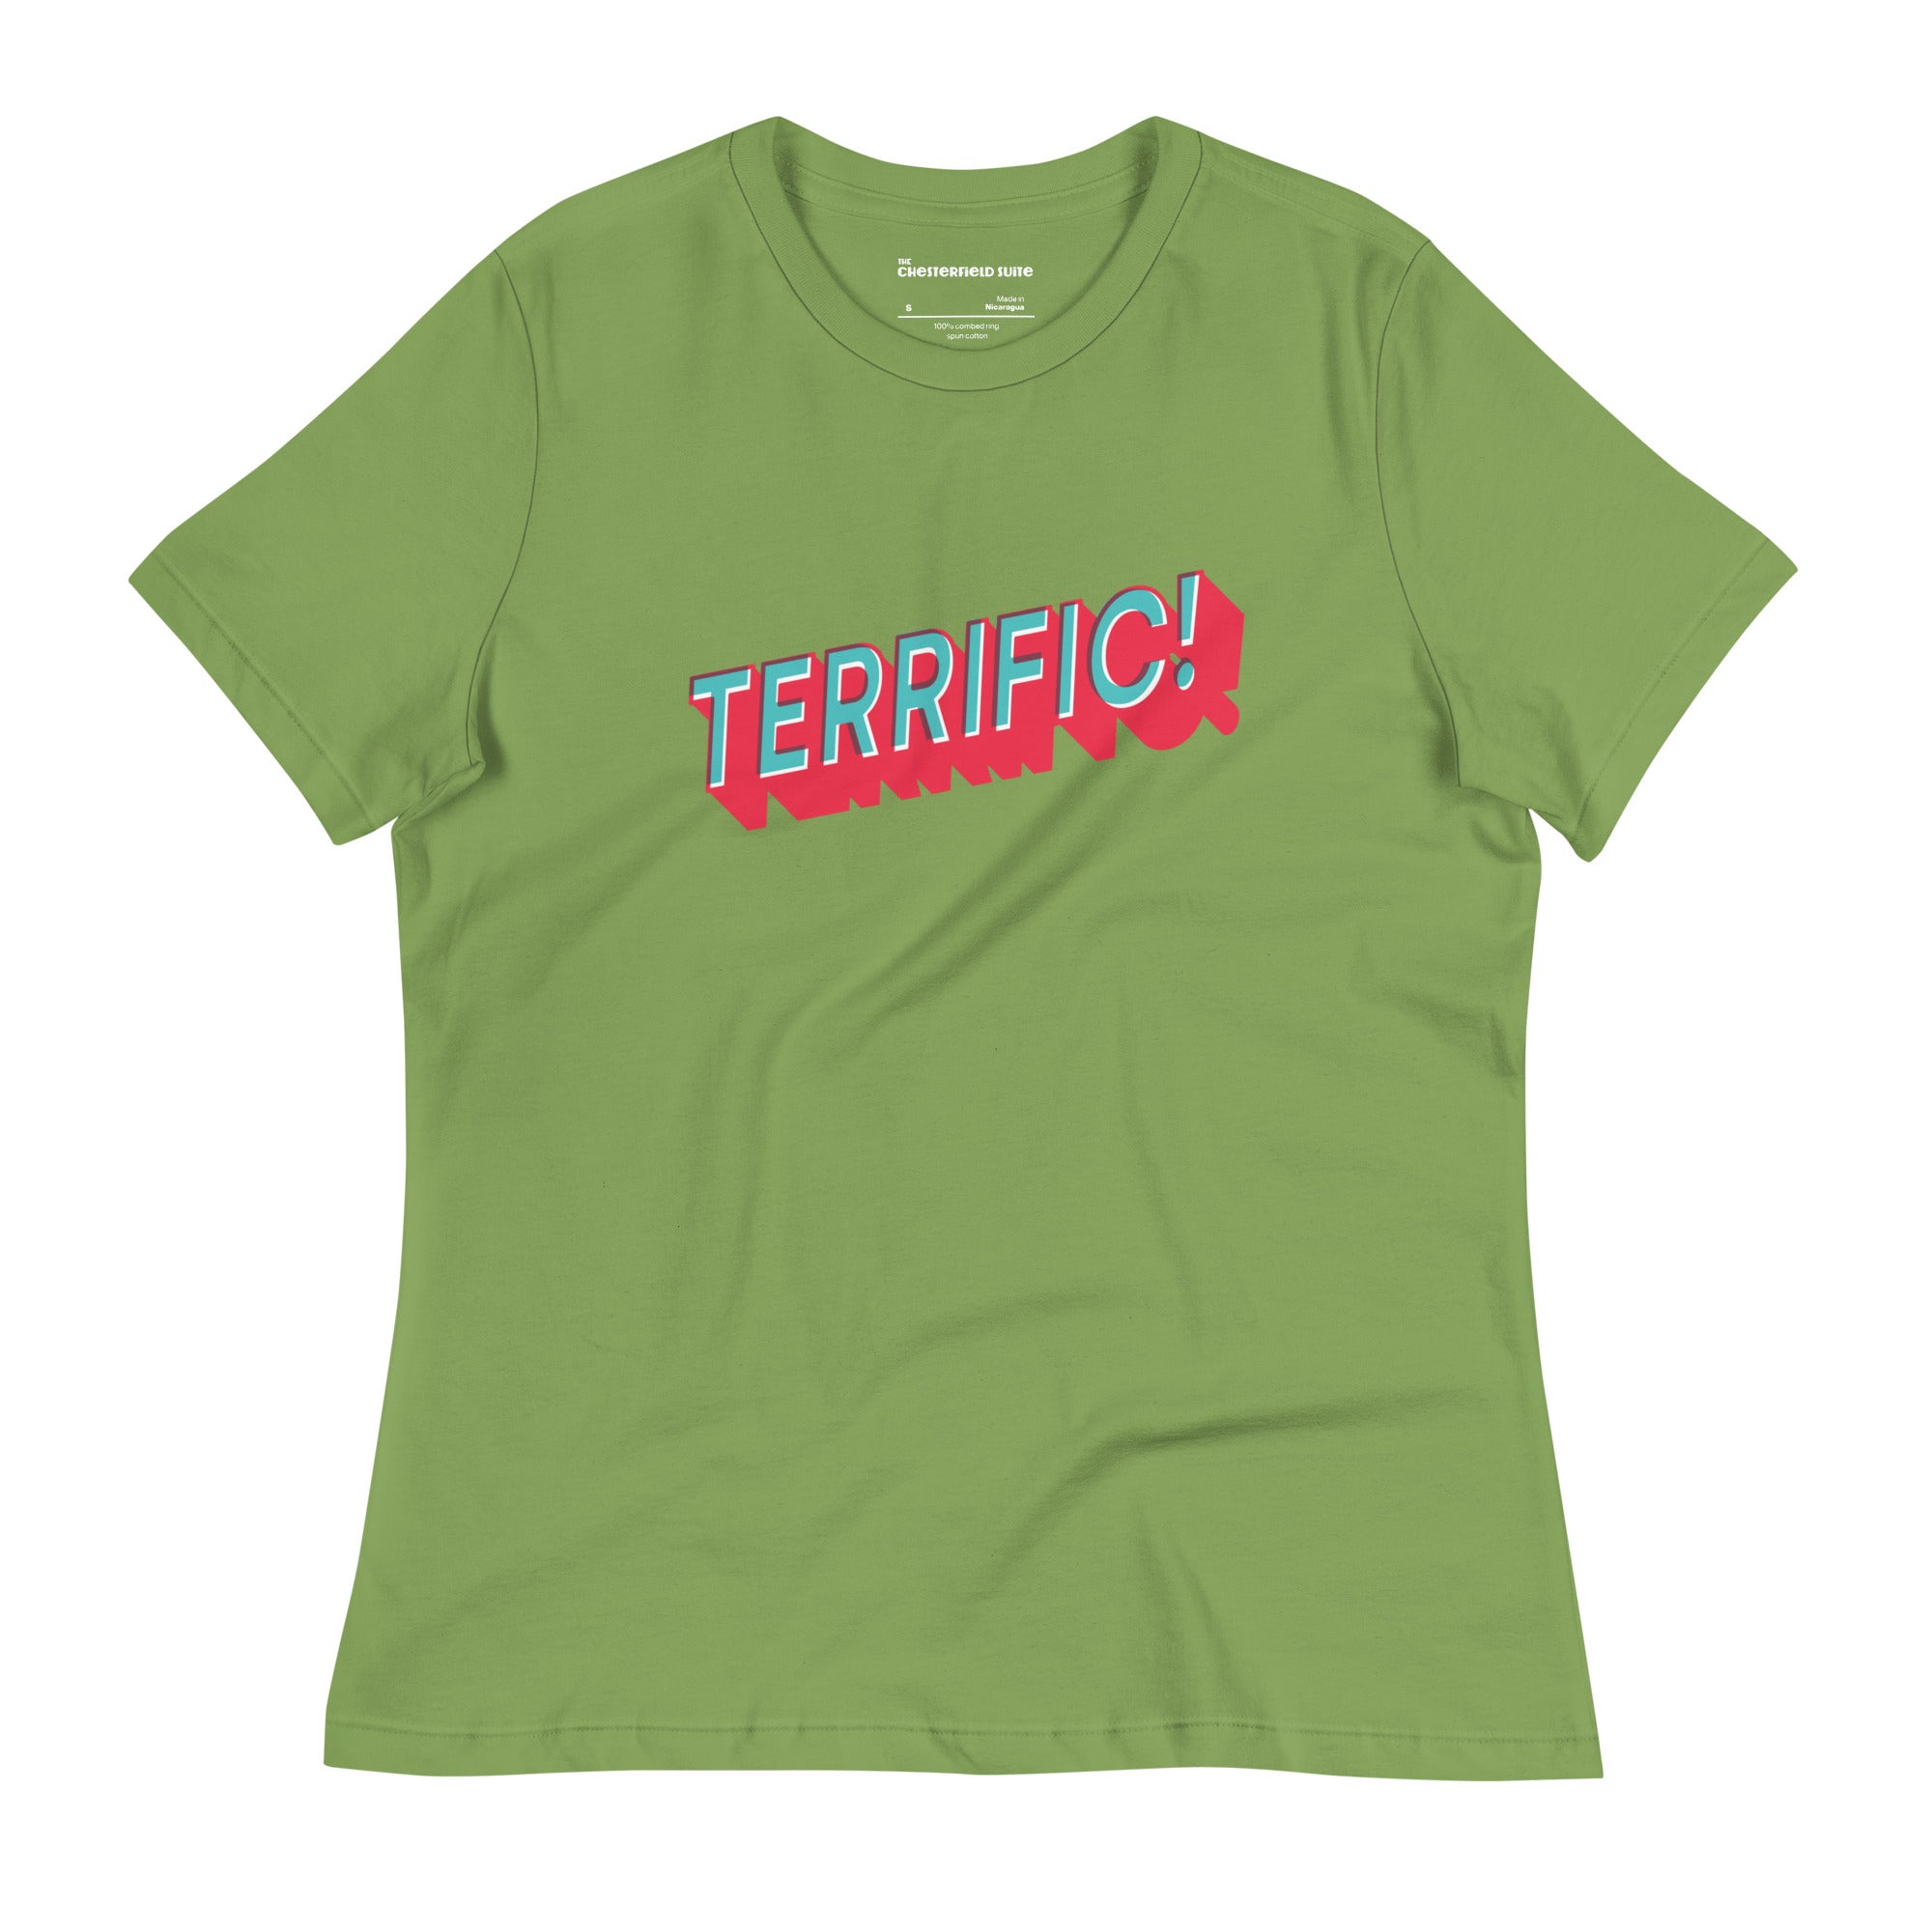 the word terrific in turquoise and red on a green women's t-shirt